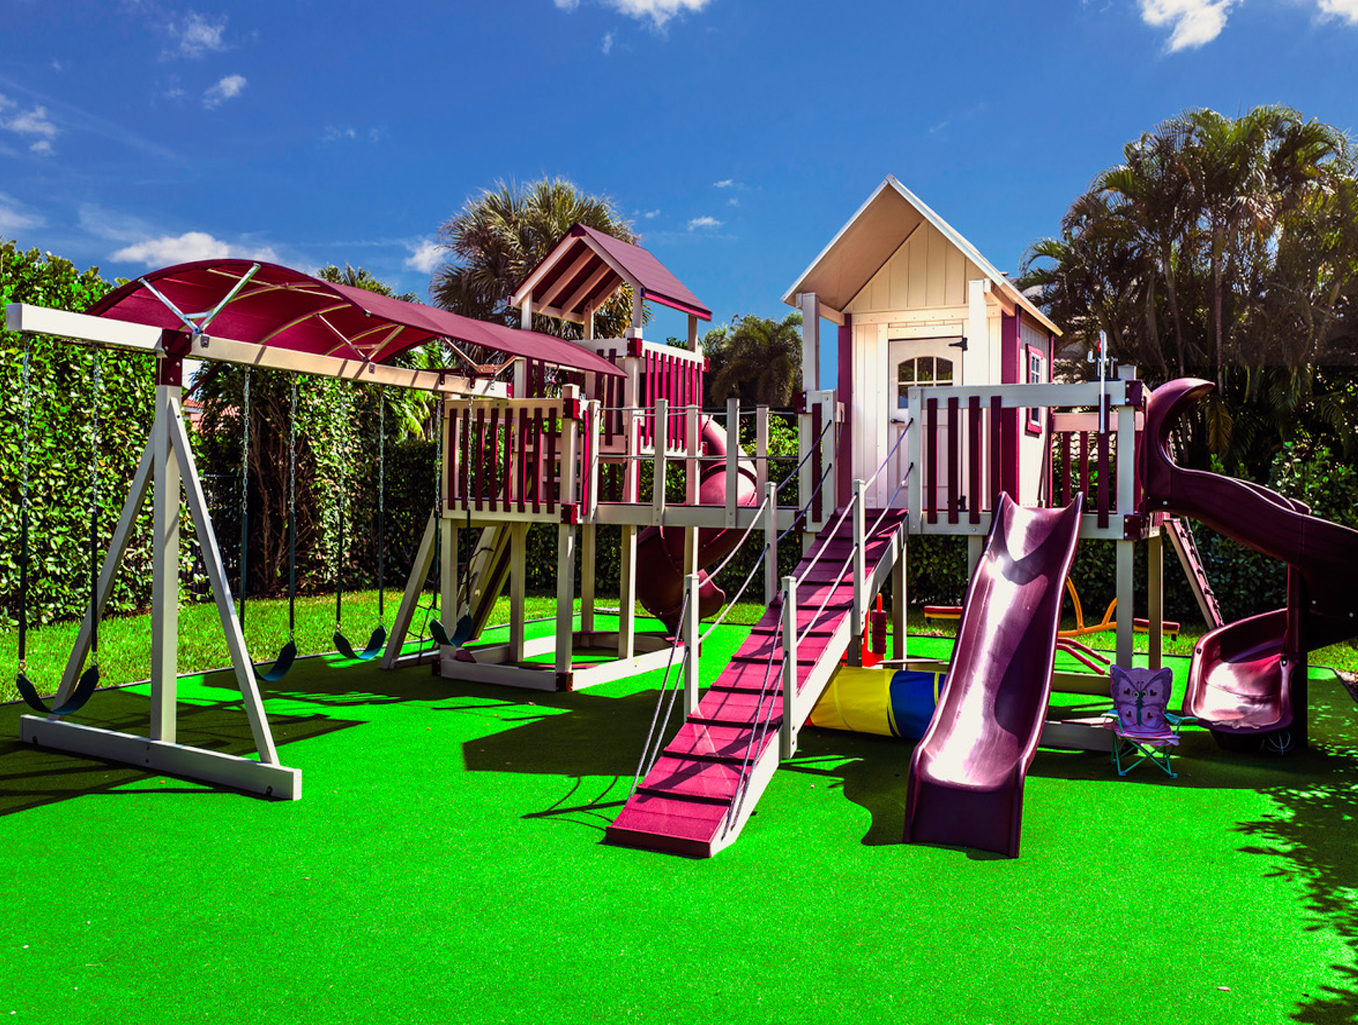 Sun-Safe Play: Embracing Outdoor Adventures with Kool Kid Shady Vinyl Playsets and Swing Sets in the Digital Age